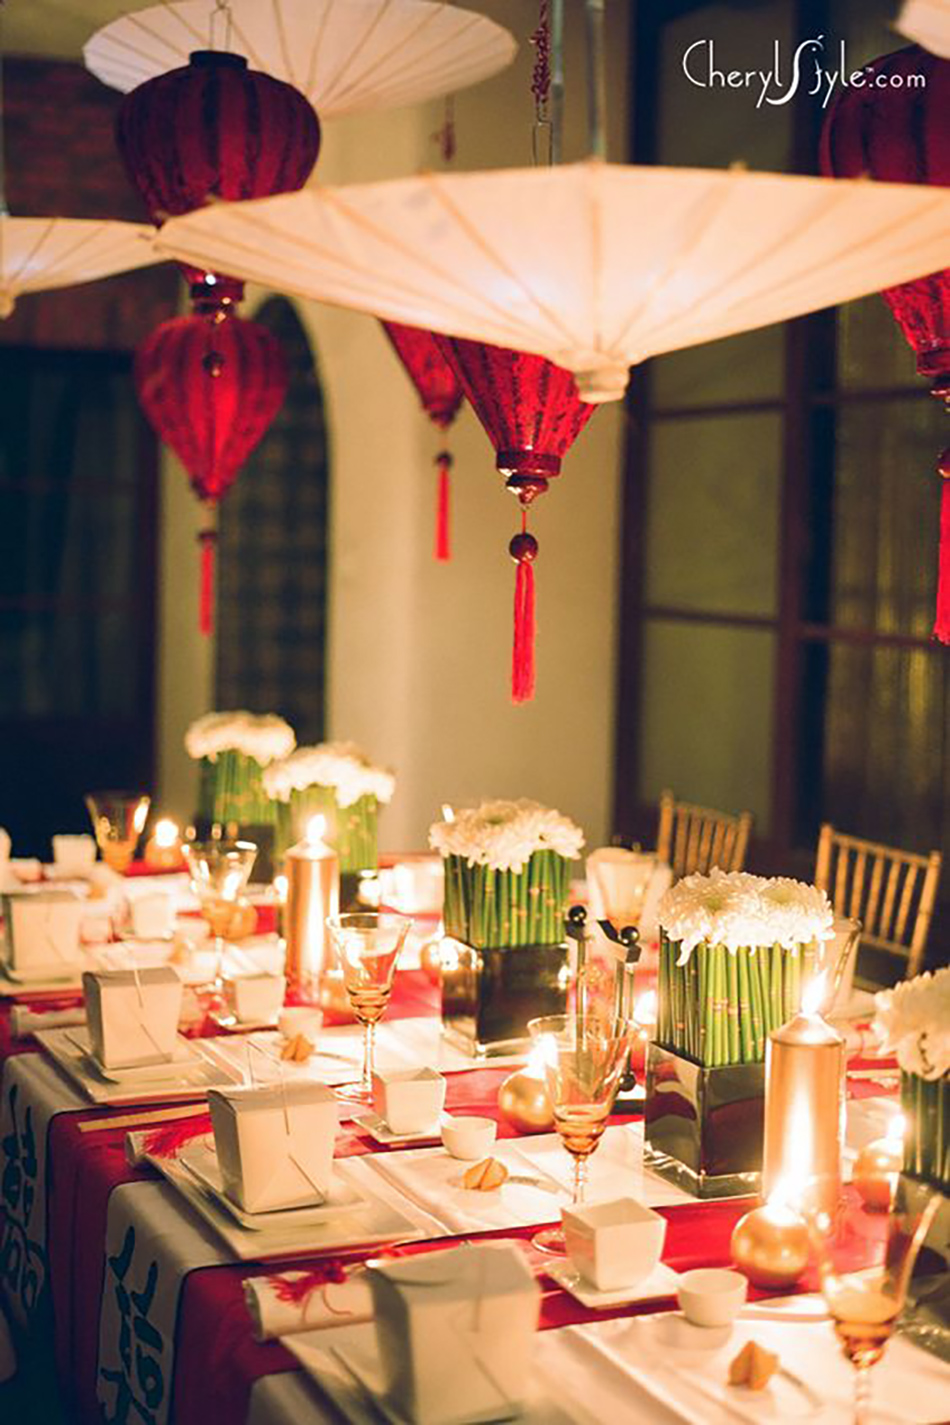 Celebrate your wedding with a Chinese New Year theme